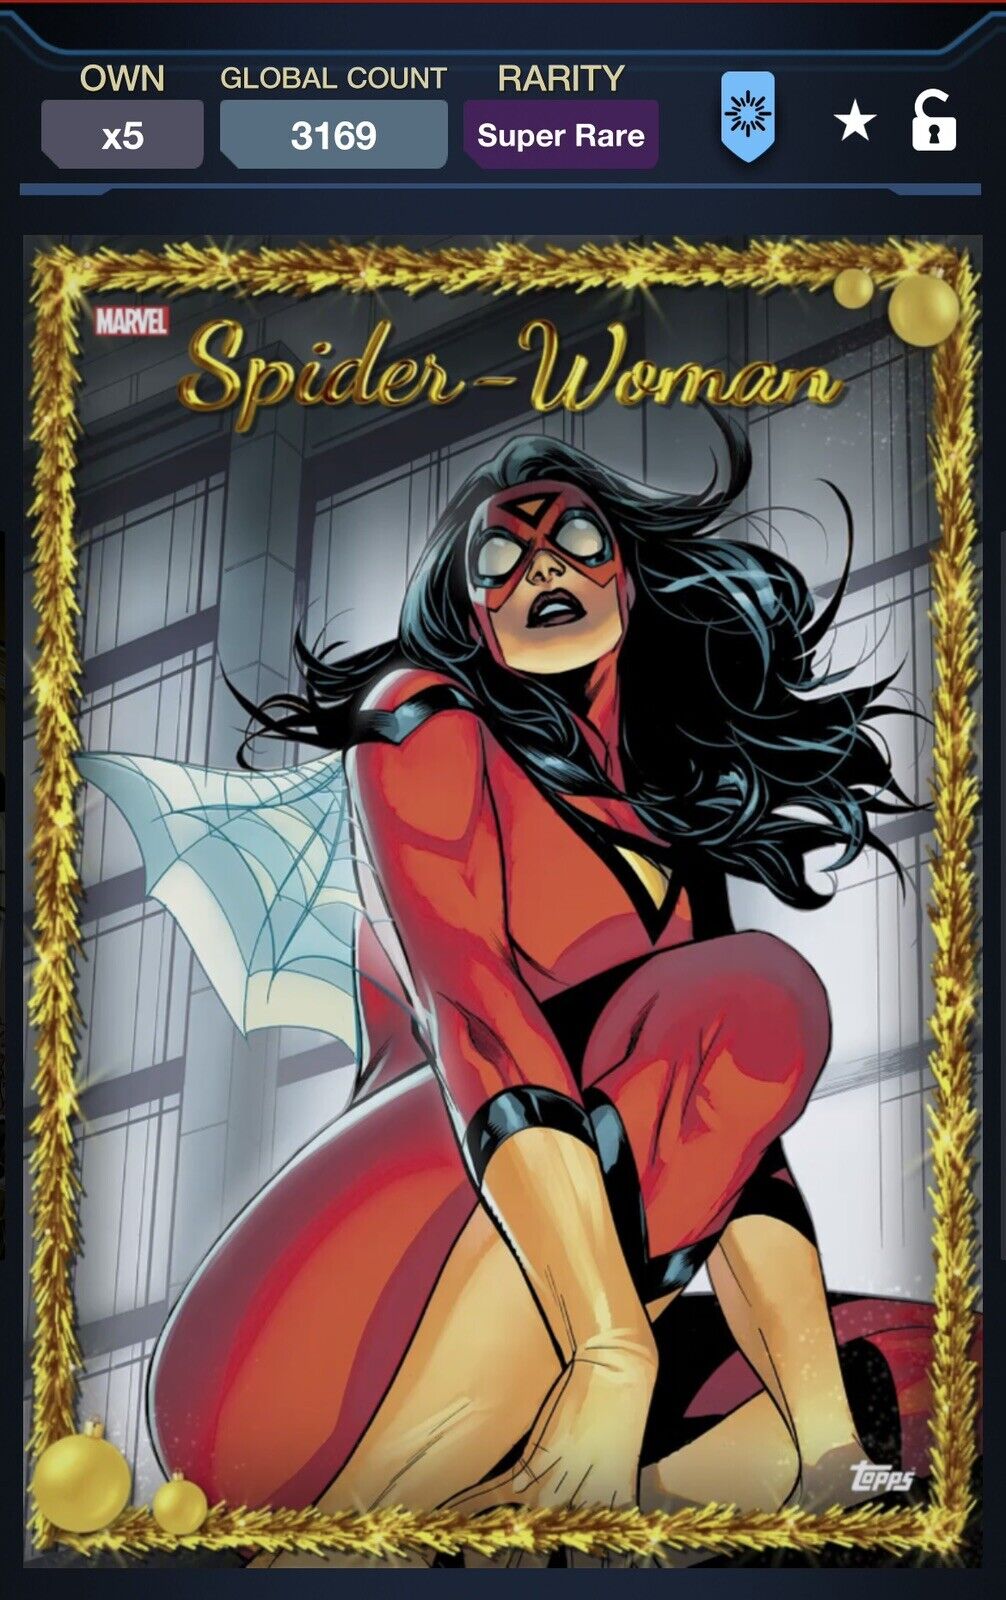 Topps Marvel Collect Digital Spider- Woman Super Rare Gold Motion